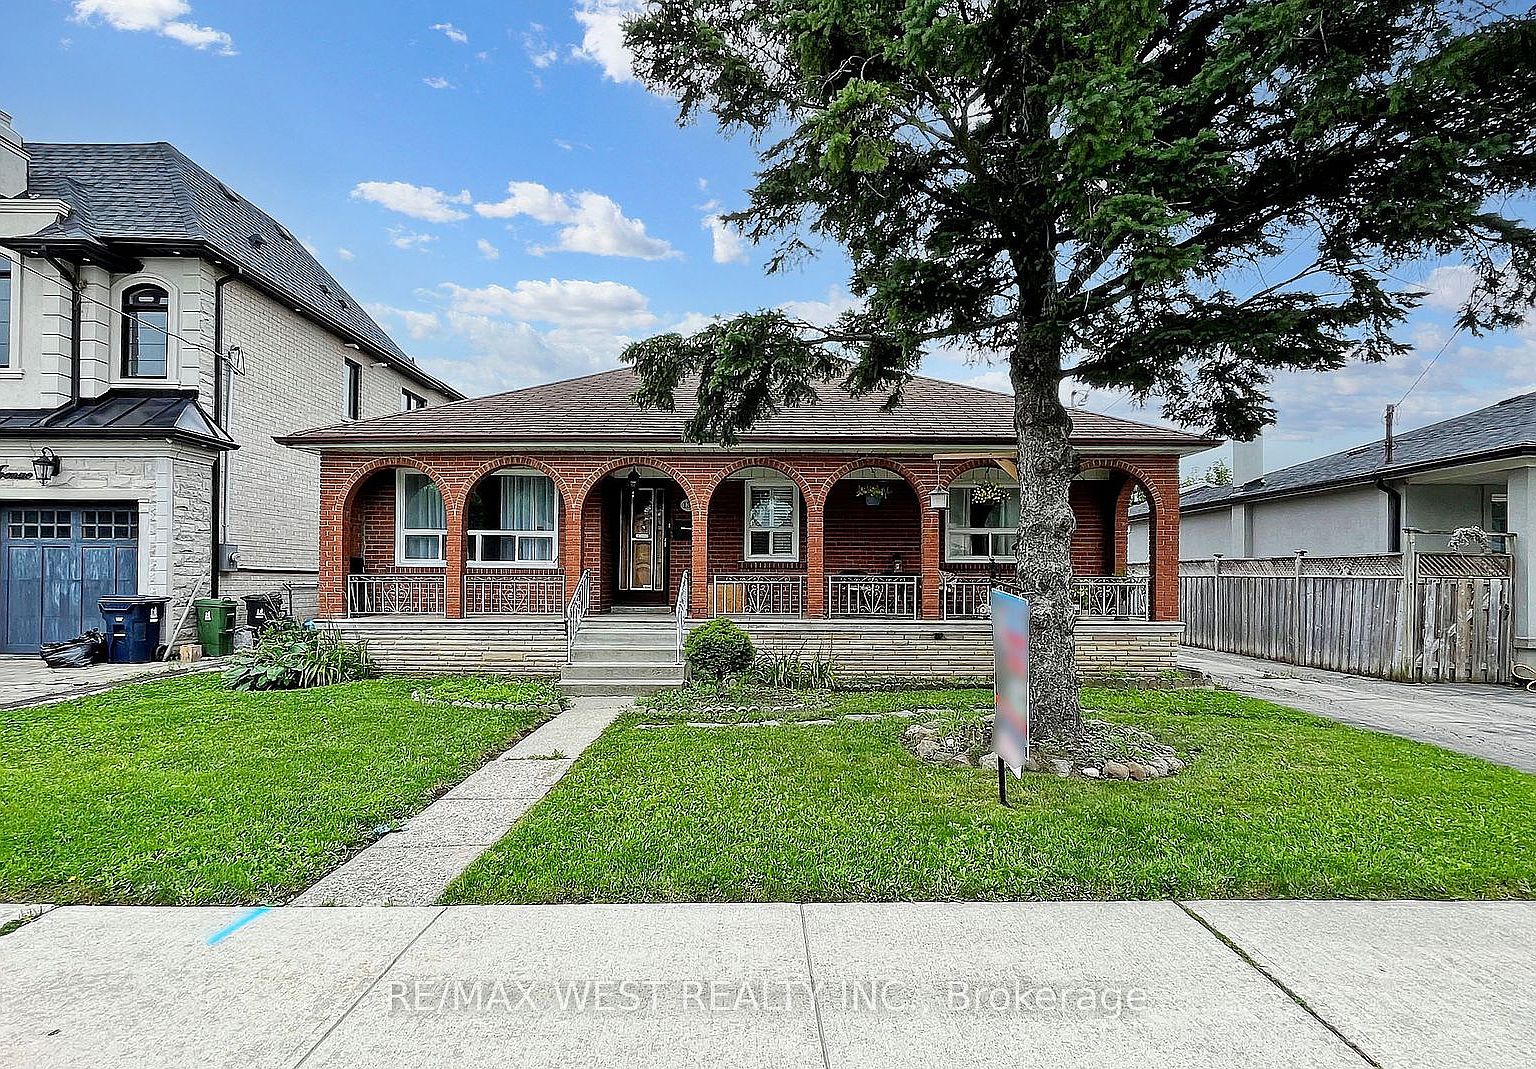 139 Ranee Ave, Toronto, ON M6A 1N3